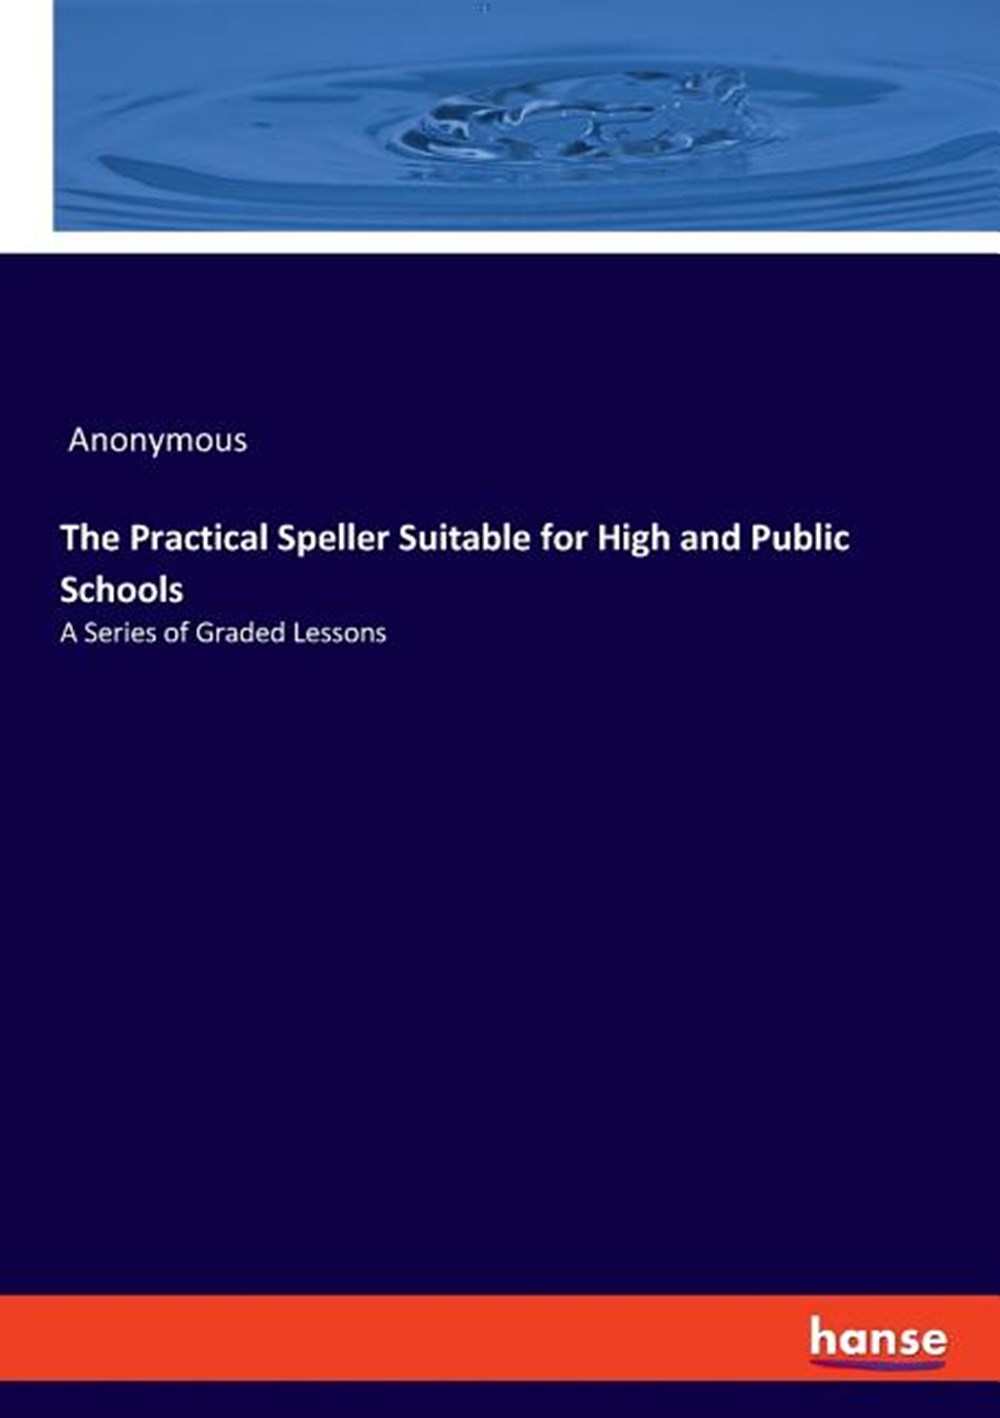 Practical Speller Suitable for High and Public Schools: A Series of Graded Lessons